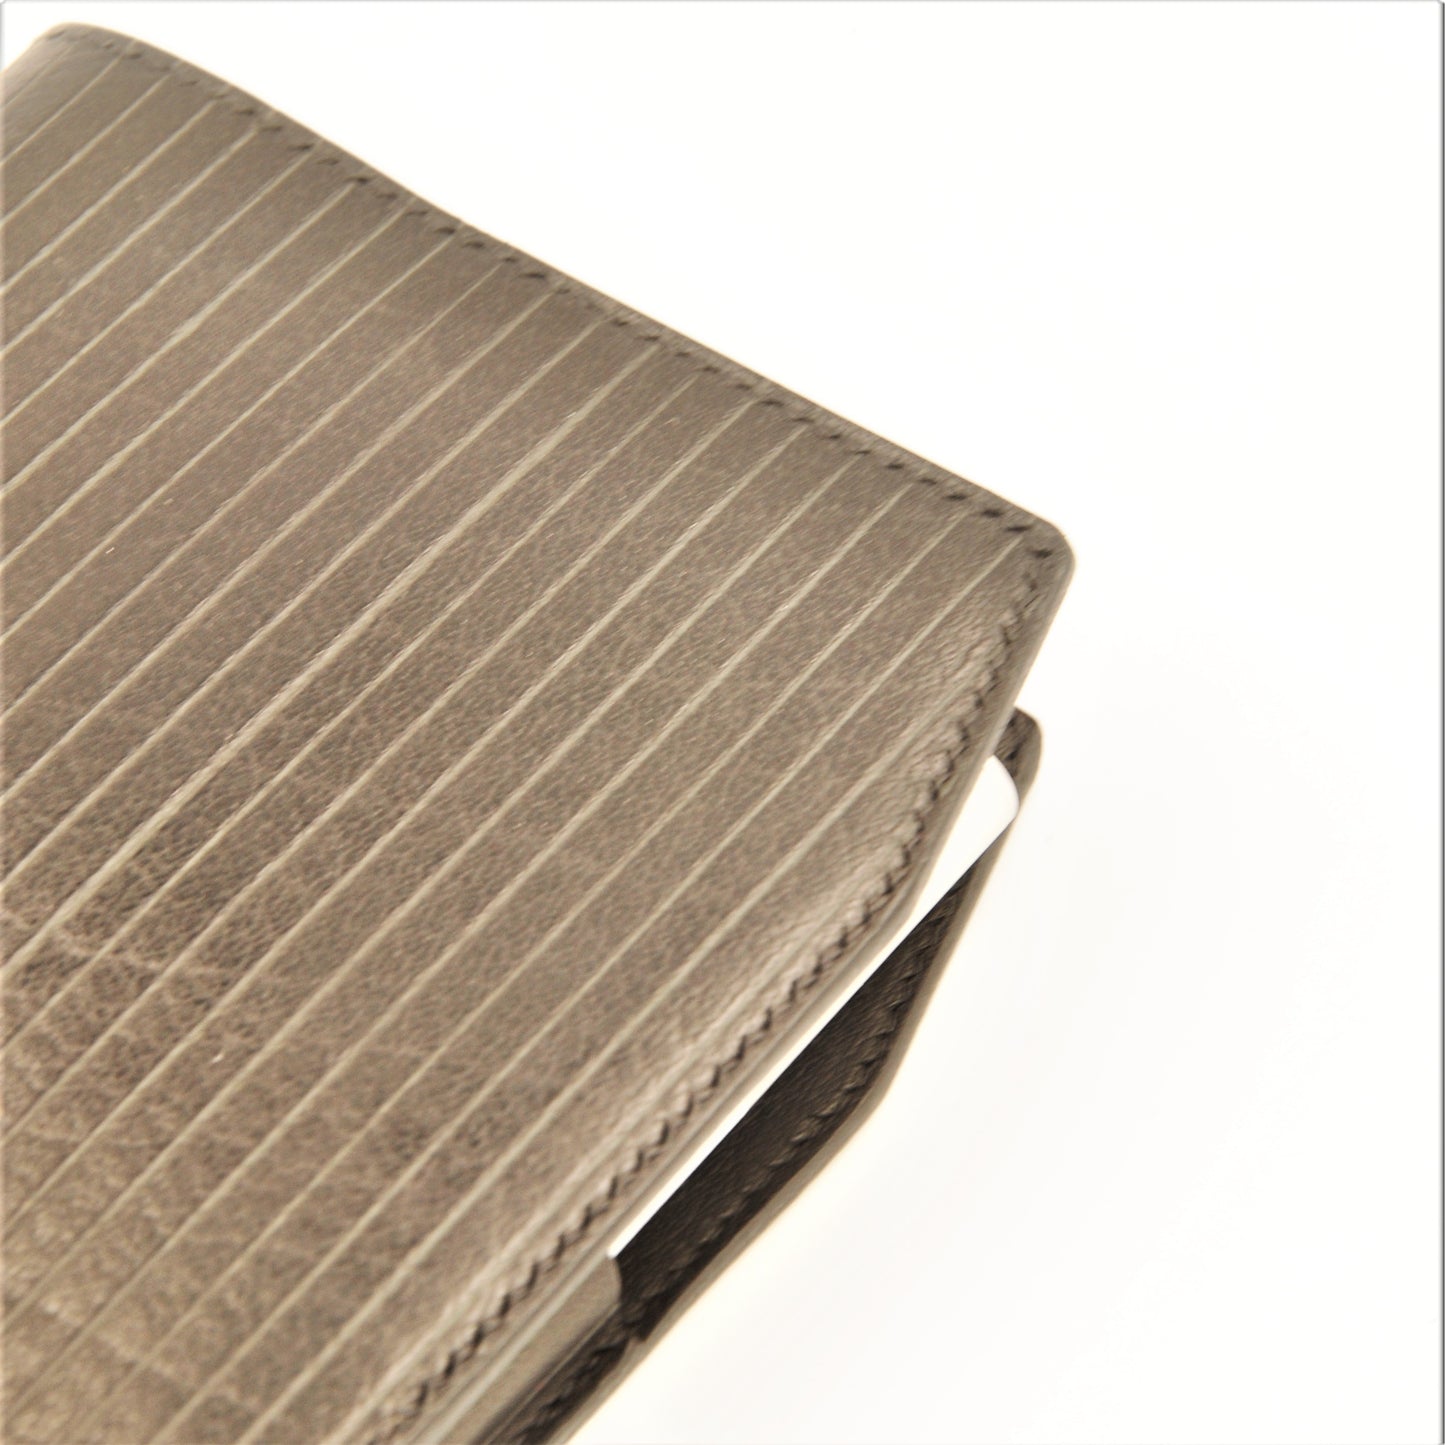 HANNOVER A5-P Notebook Sleeve